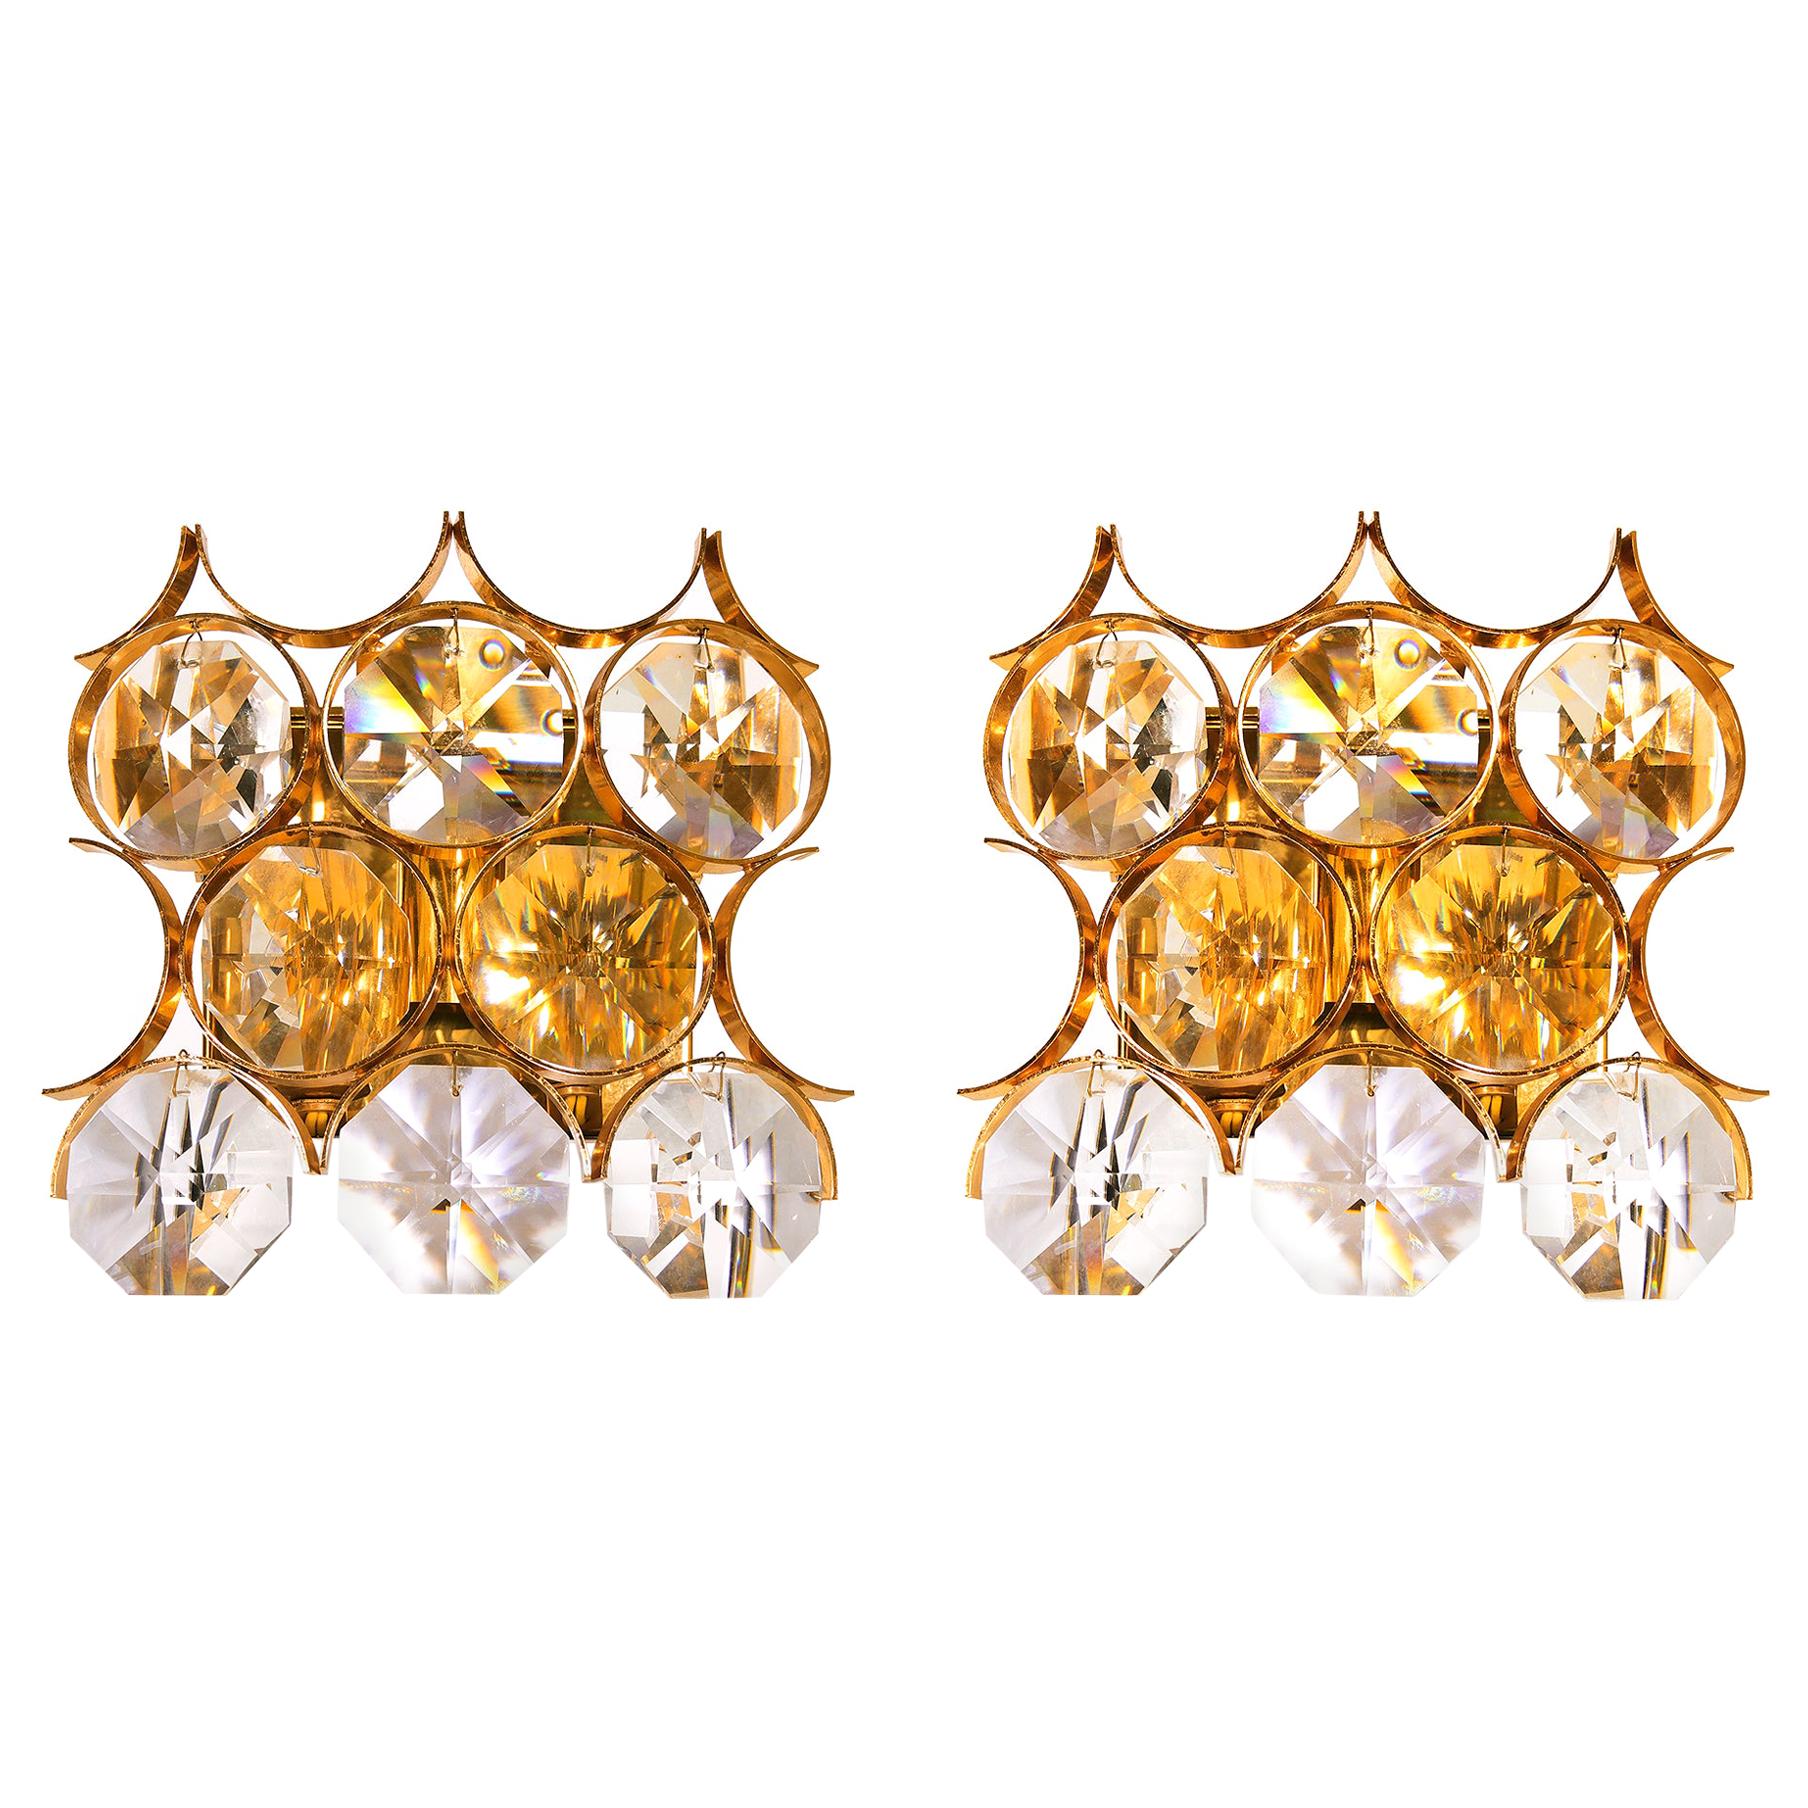 1960 Germany Palwa Pair of Wall Sconces Crystal Glass & Gilt Brass For Sale